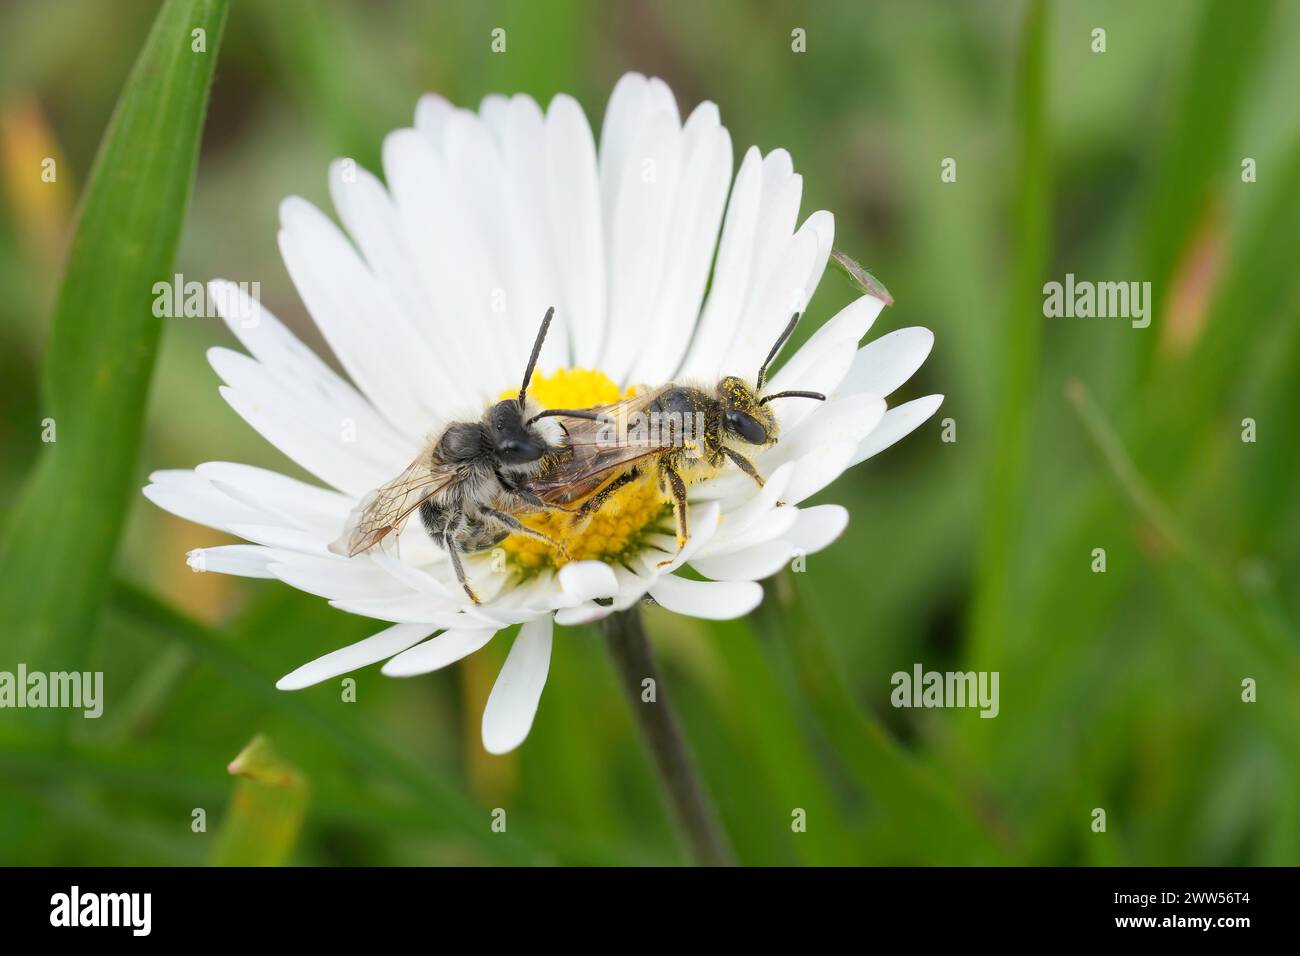 Detailed closeup on a Copulation of red-bellied miner mining bees, Andrena ventralis in a white common daisy flower, Bellis perennis Stock Photo